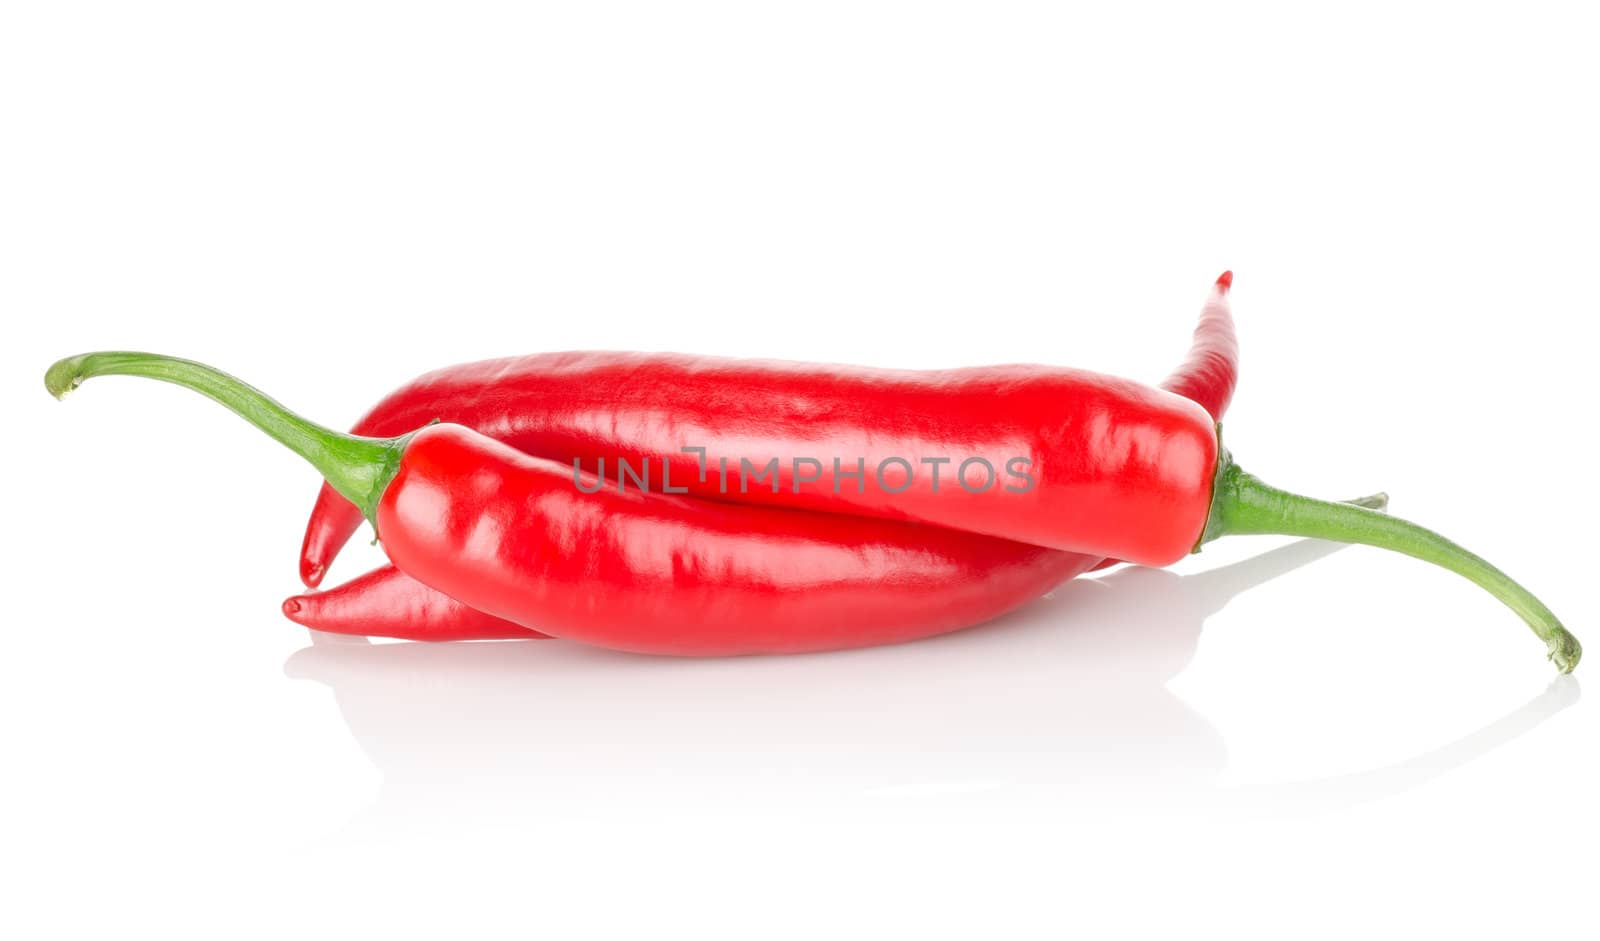 Three chili peppers isolated on a white background